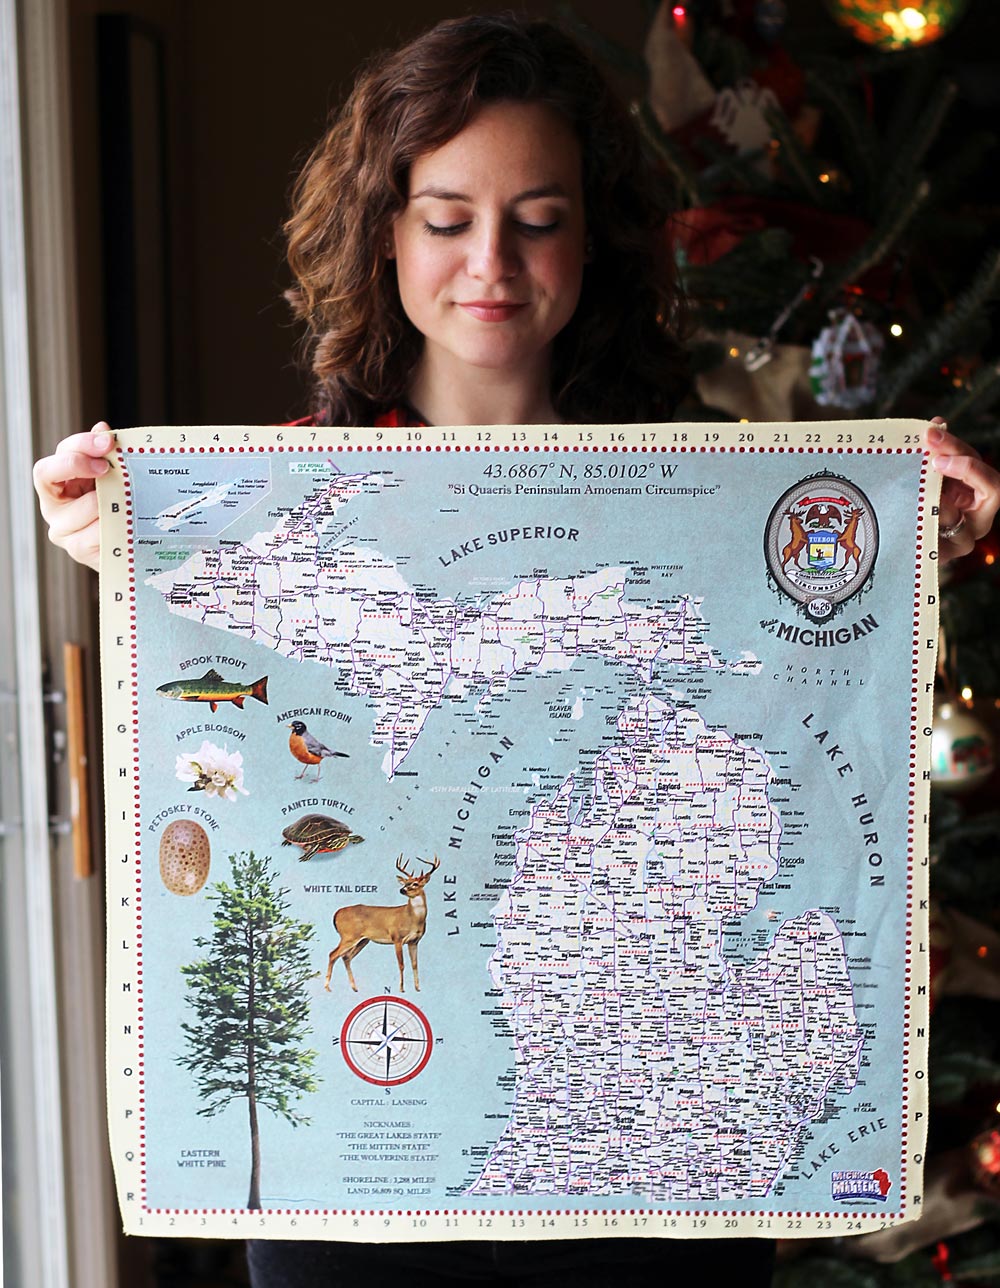 "Wear This Map" Bandana from Michigan Mittens // 4 Fun Gift Ideas From Michigan Mittens  (via Wading in Big Shoes)